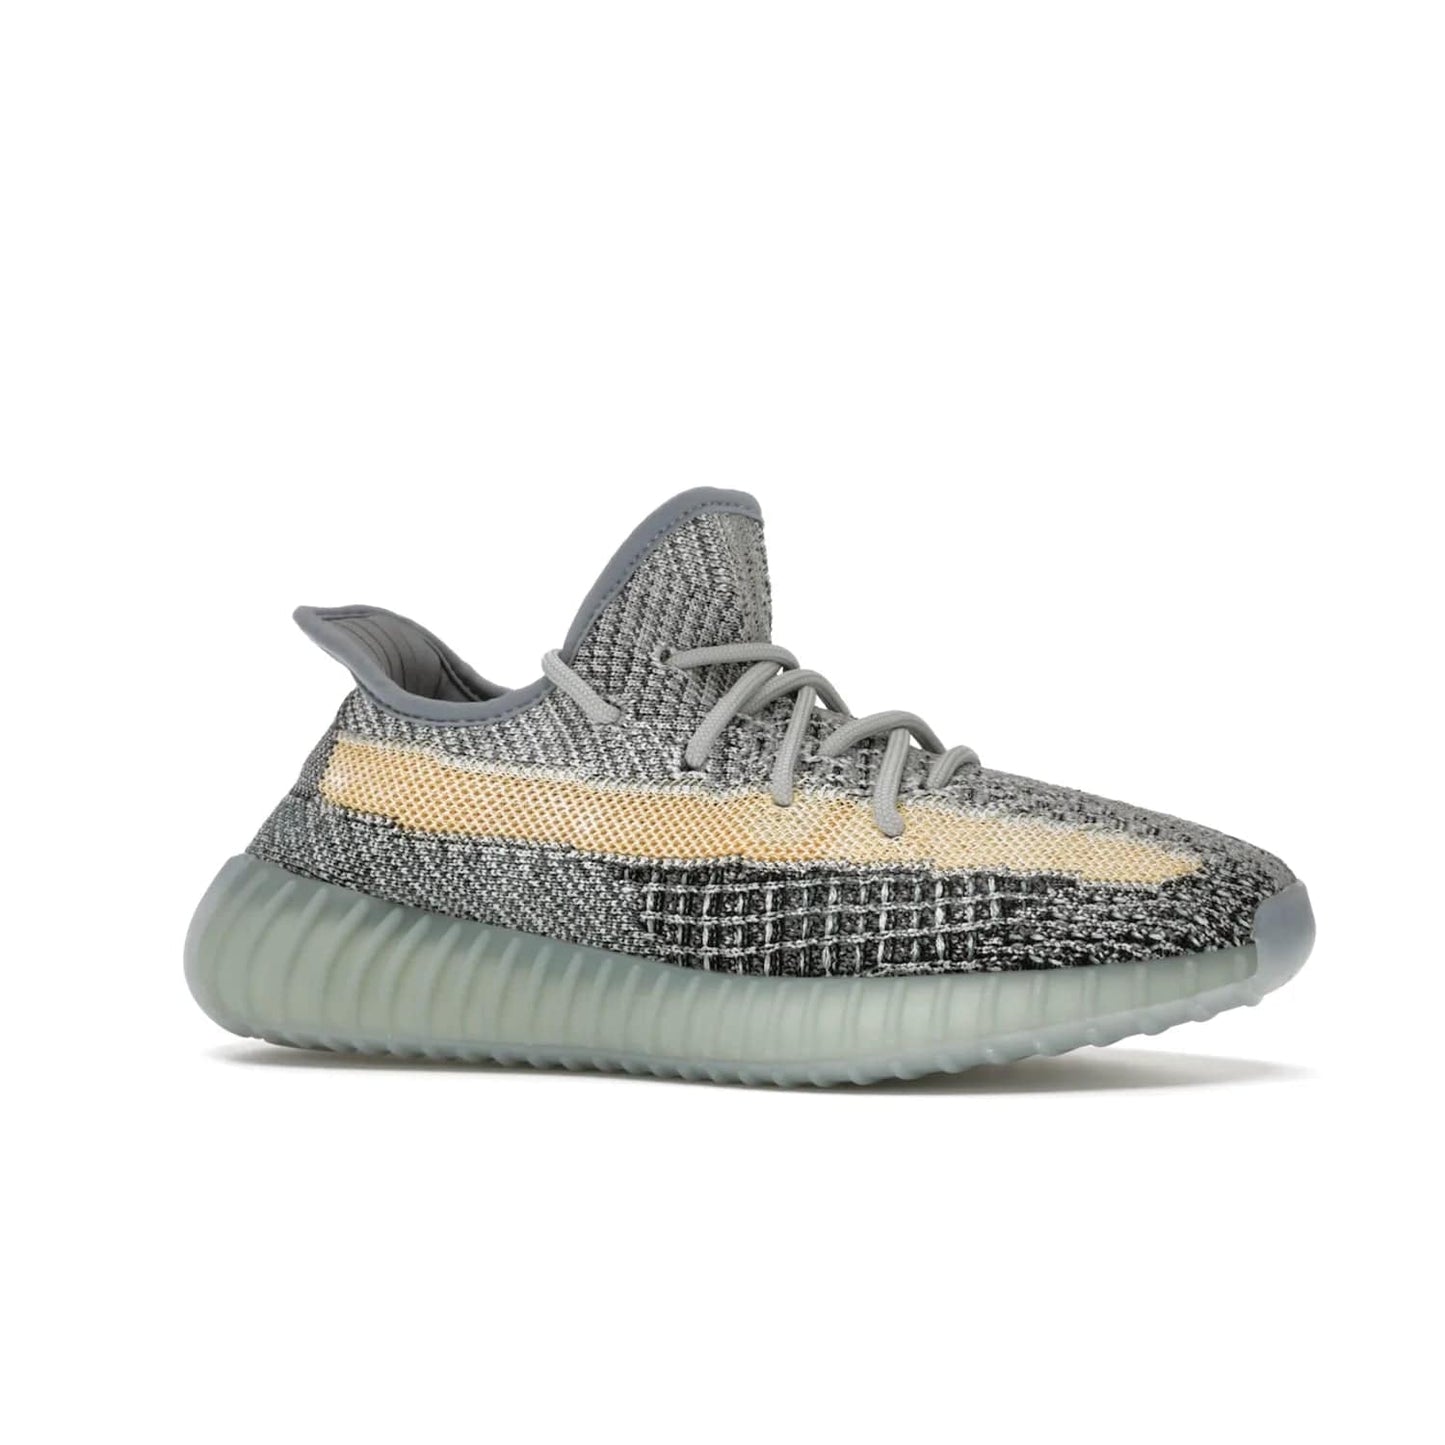 adidas Yeezy Boost 350 V2 Ash Blue - Image 3 - Only at www.BallersClubKickz.com - Must-have design made of engineered primeknit upper, comfortable sock-like upper and full-length Boost midsole, and semi-translucent rubber cage for added durability and style. The adidas Yeezy Boost 350 V2 Ash Blue blends timeless colors and comfort.